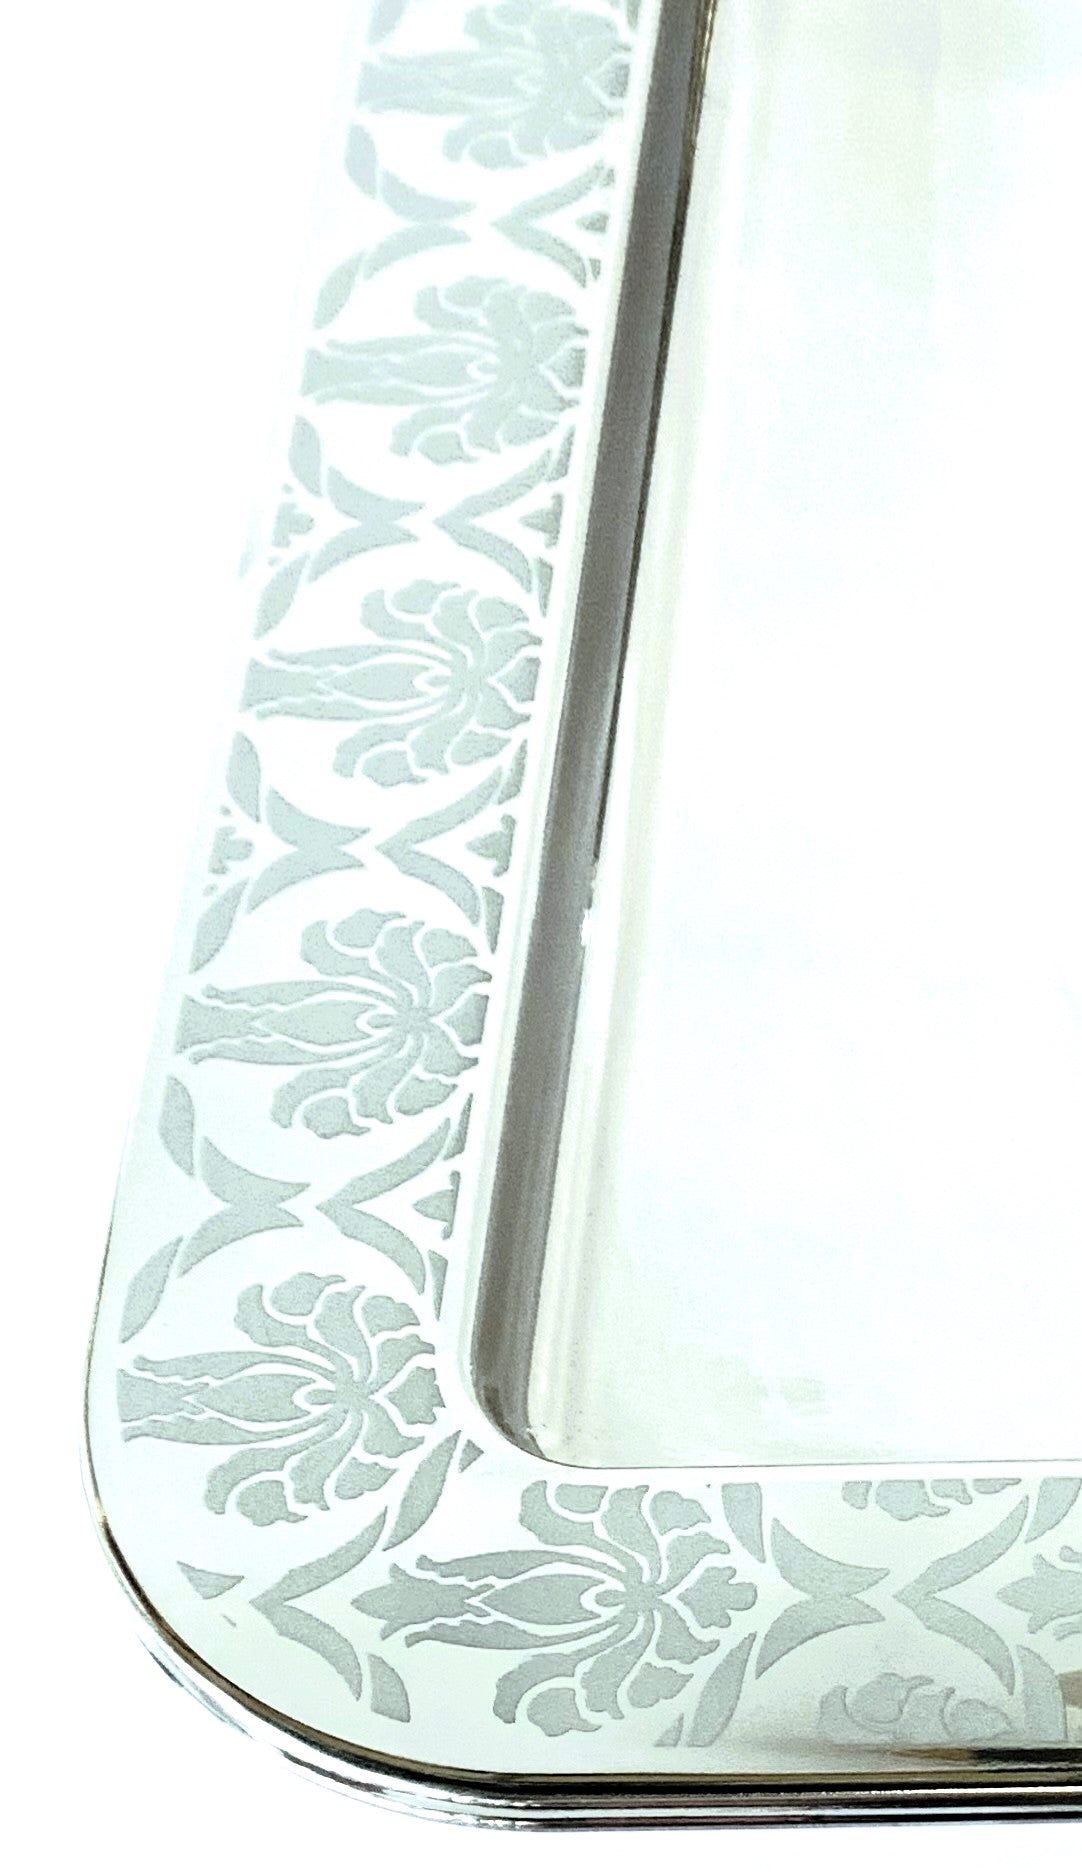 Serving Tray 18/10 Stainless Steel made in Italy by Giorinox Damasco collection